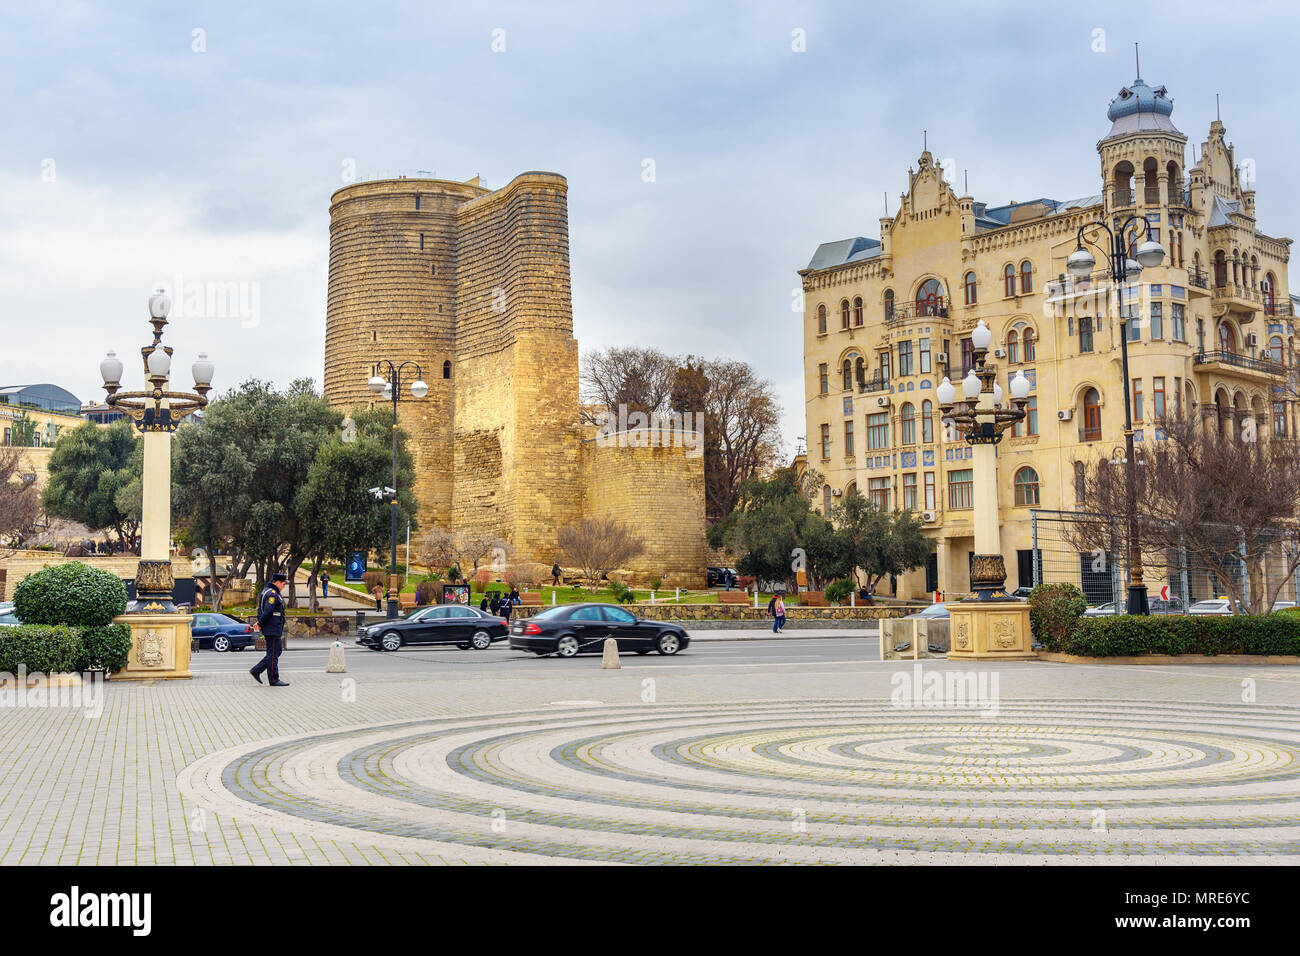 Baku, Azerbaijan - March 10, 2018: View on Maiden Tower in Old city, Icheri Sheher is the historical core Stock Photo